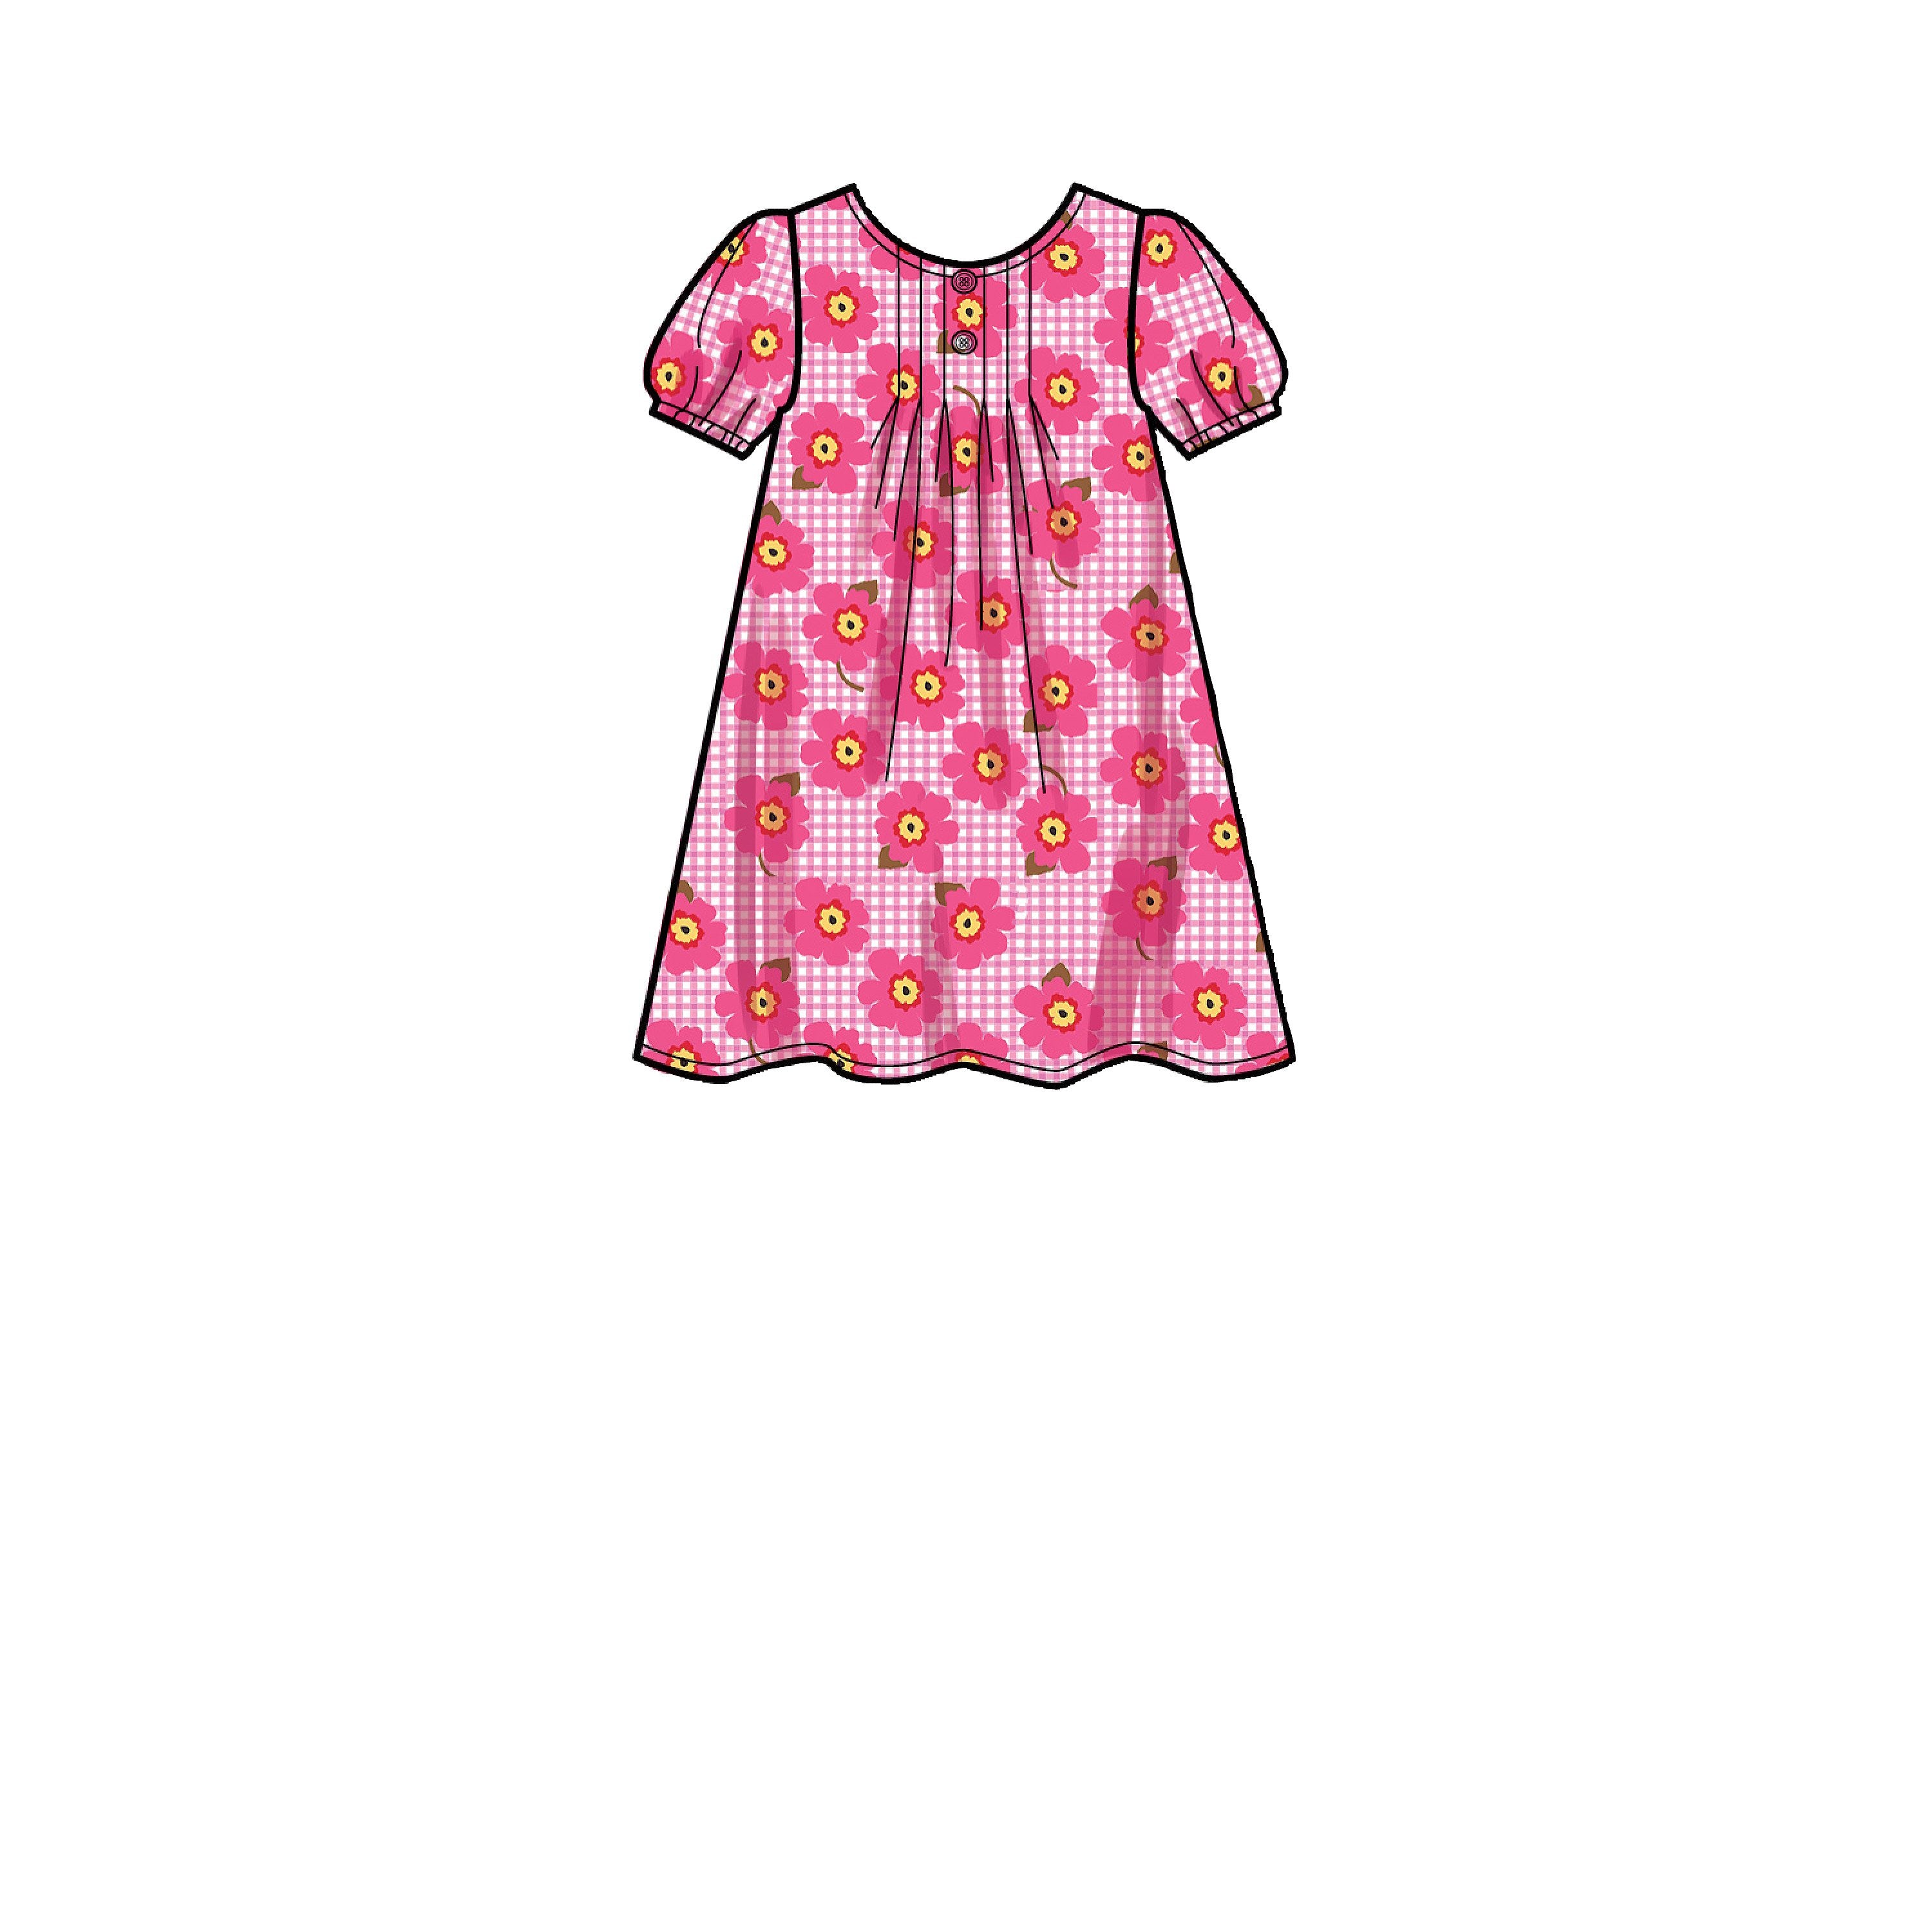 Simplicity Sewing Pattern S9321 Children's Tops, Dresses, Shorts from Jaycotts Sewing Supplies